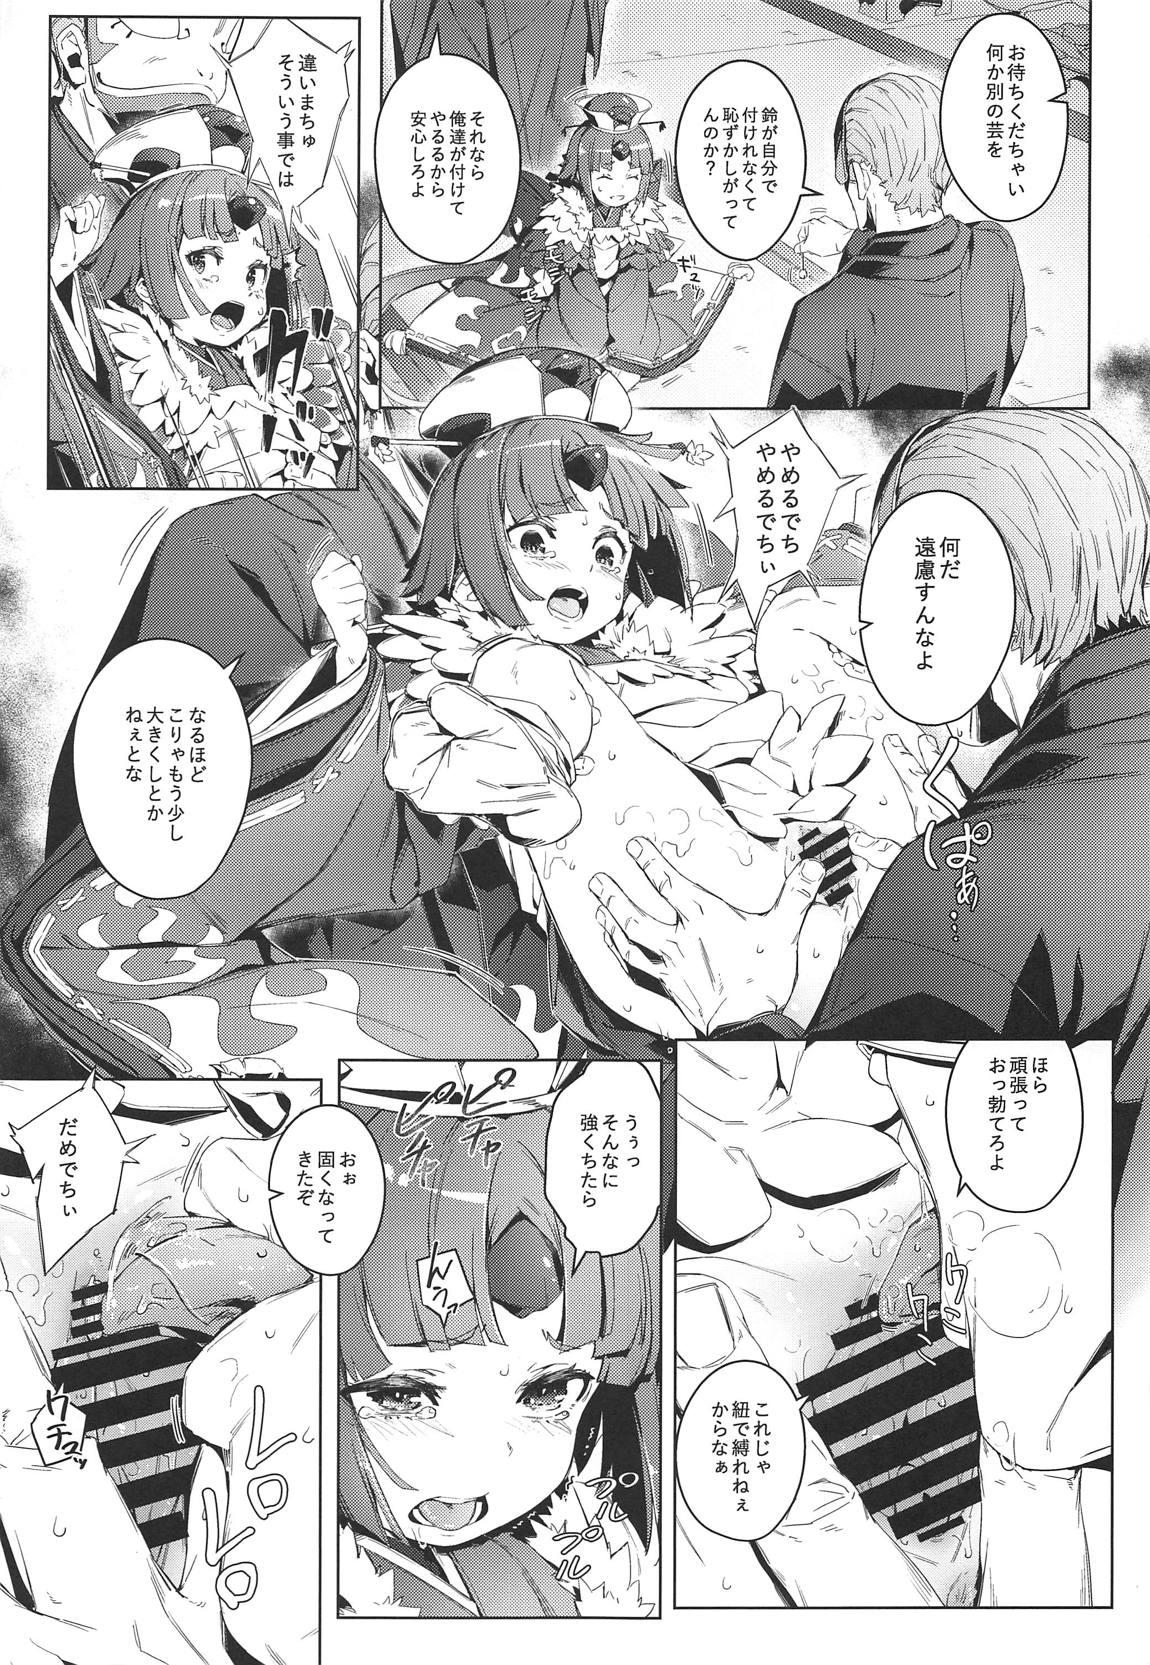 Deflowered Suzume no Namida - Fate grand order Pissing - Page 8